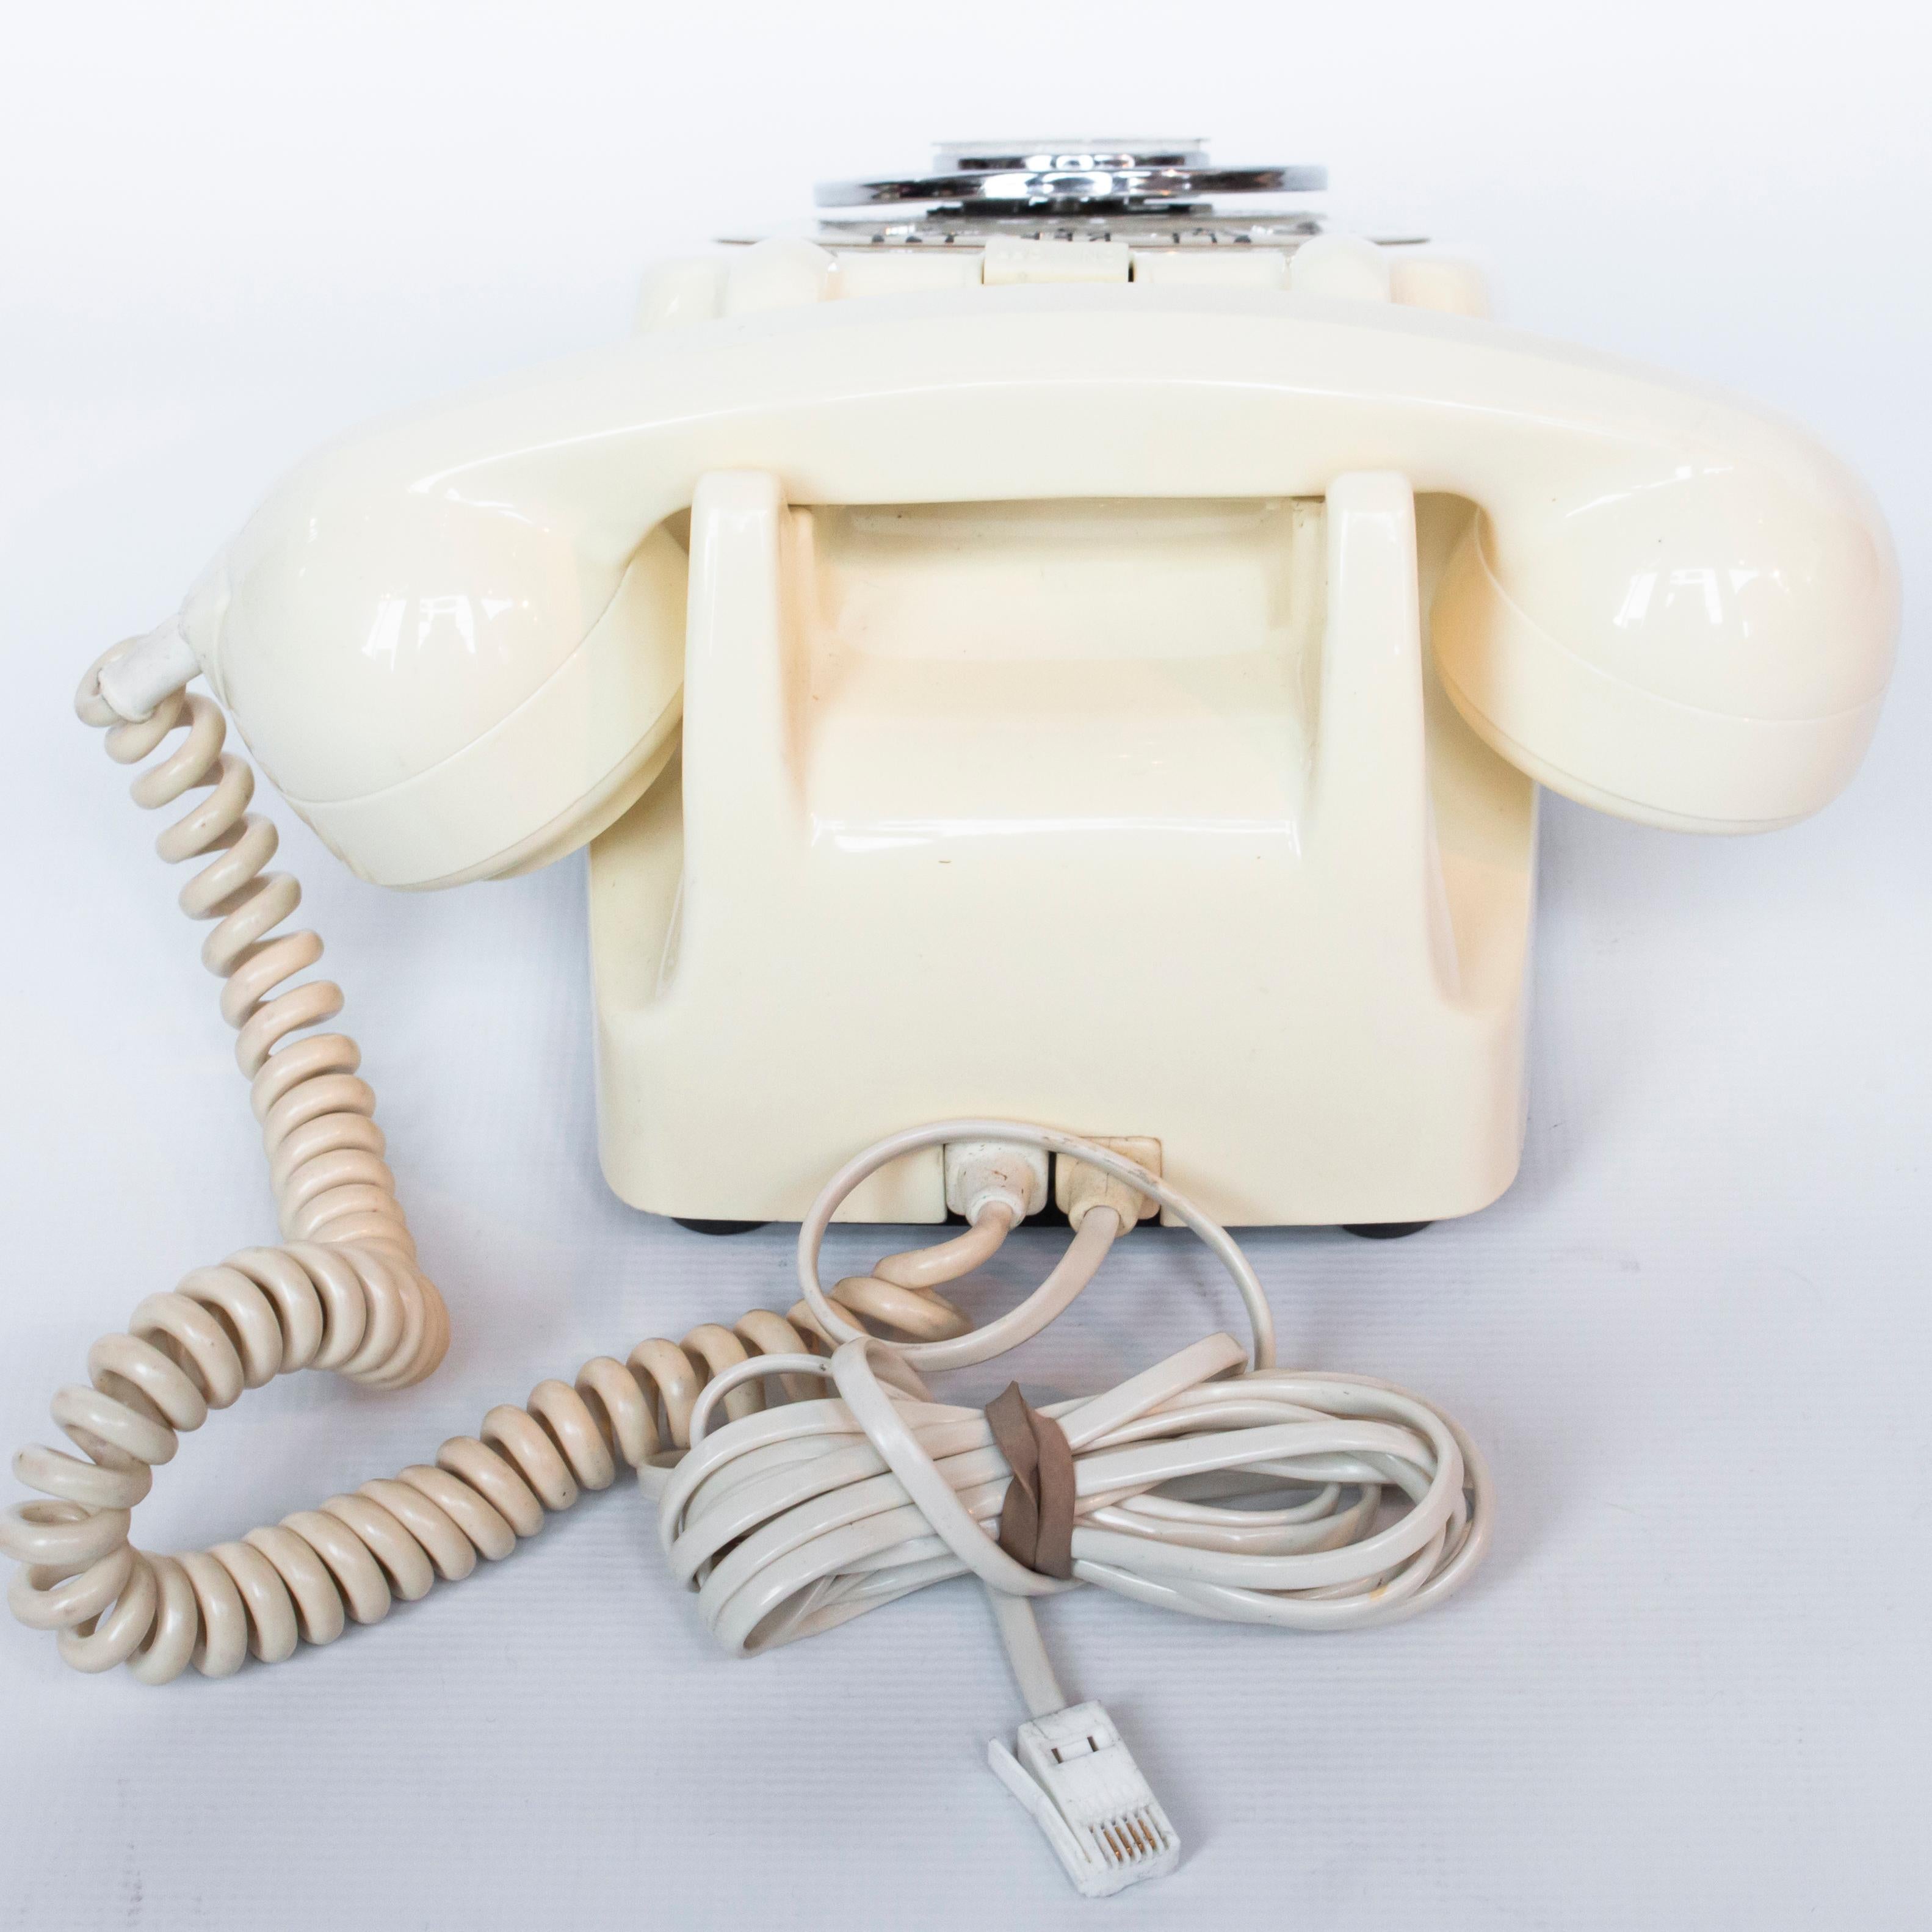 Mid-20th Century Original 1961 GPO Model 706 Telephone in Ivory, On/Off Bell Feature